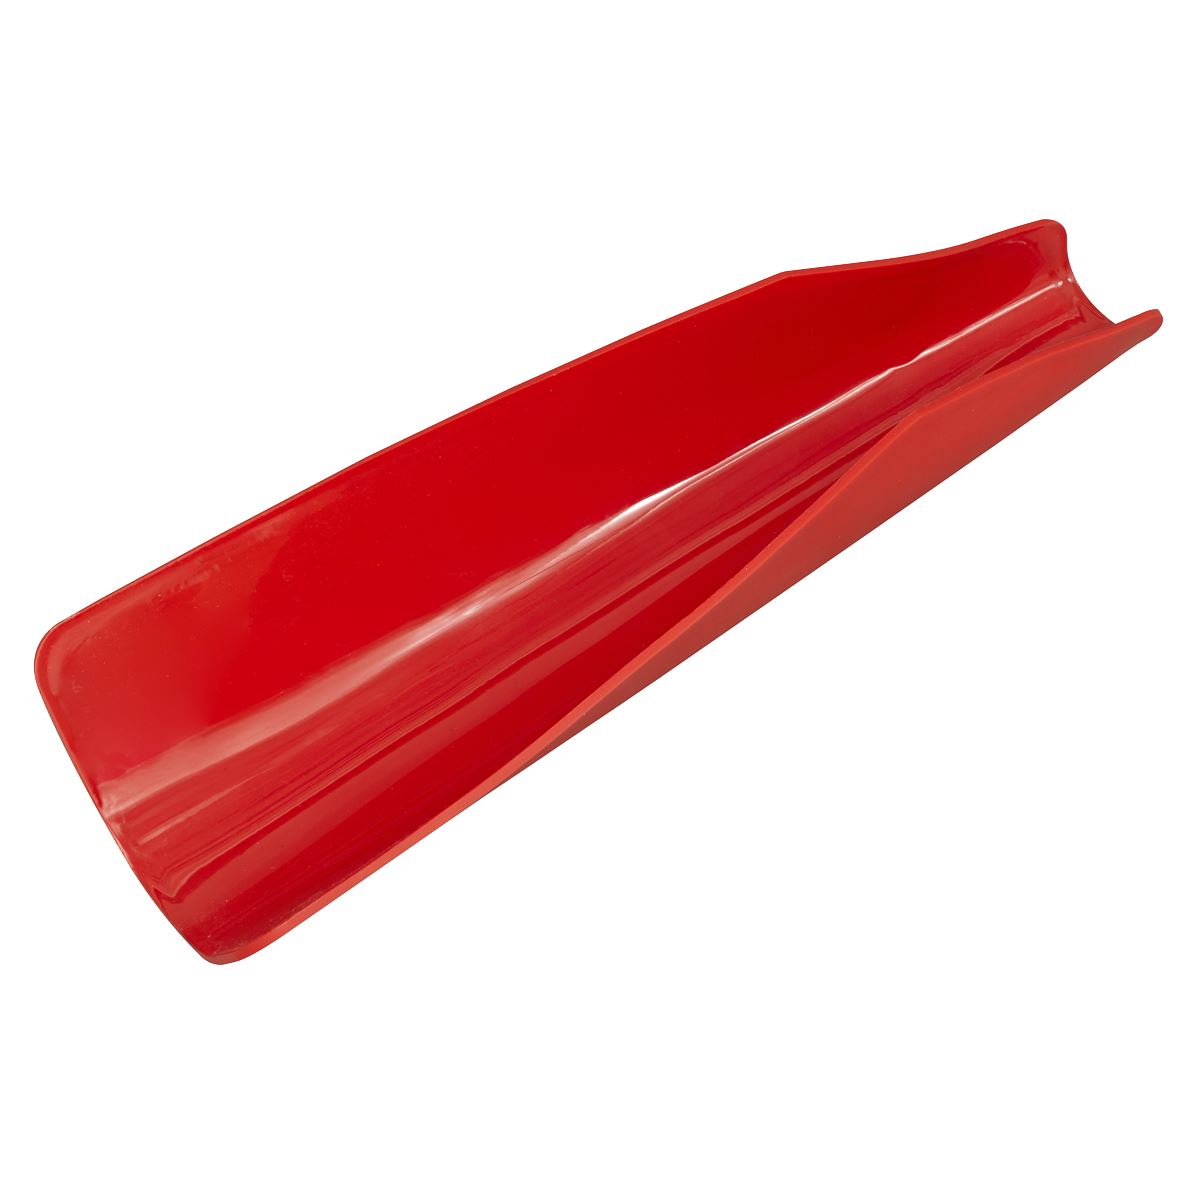 Sealey Funnel Flexible/Mouldable